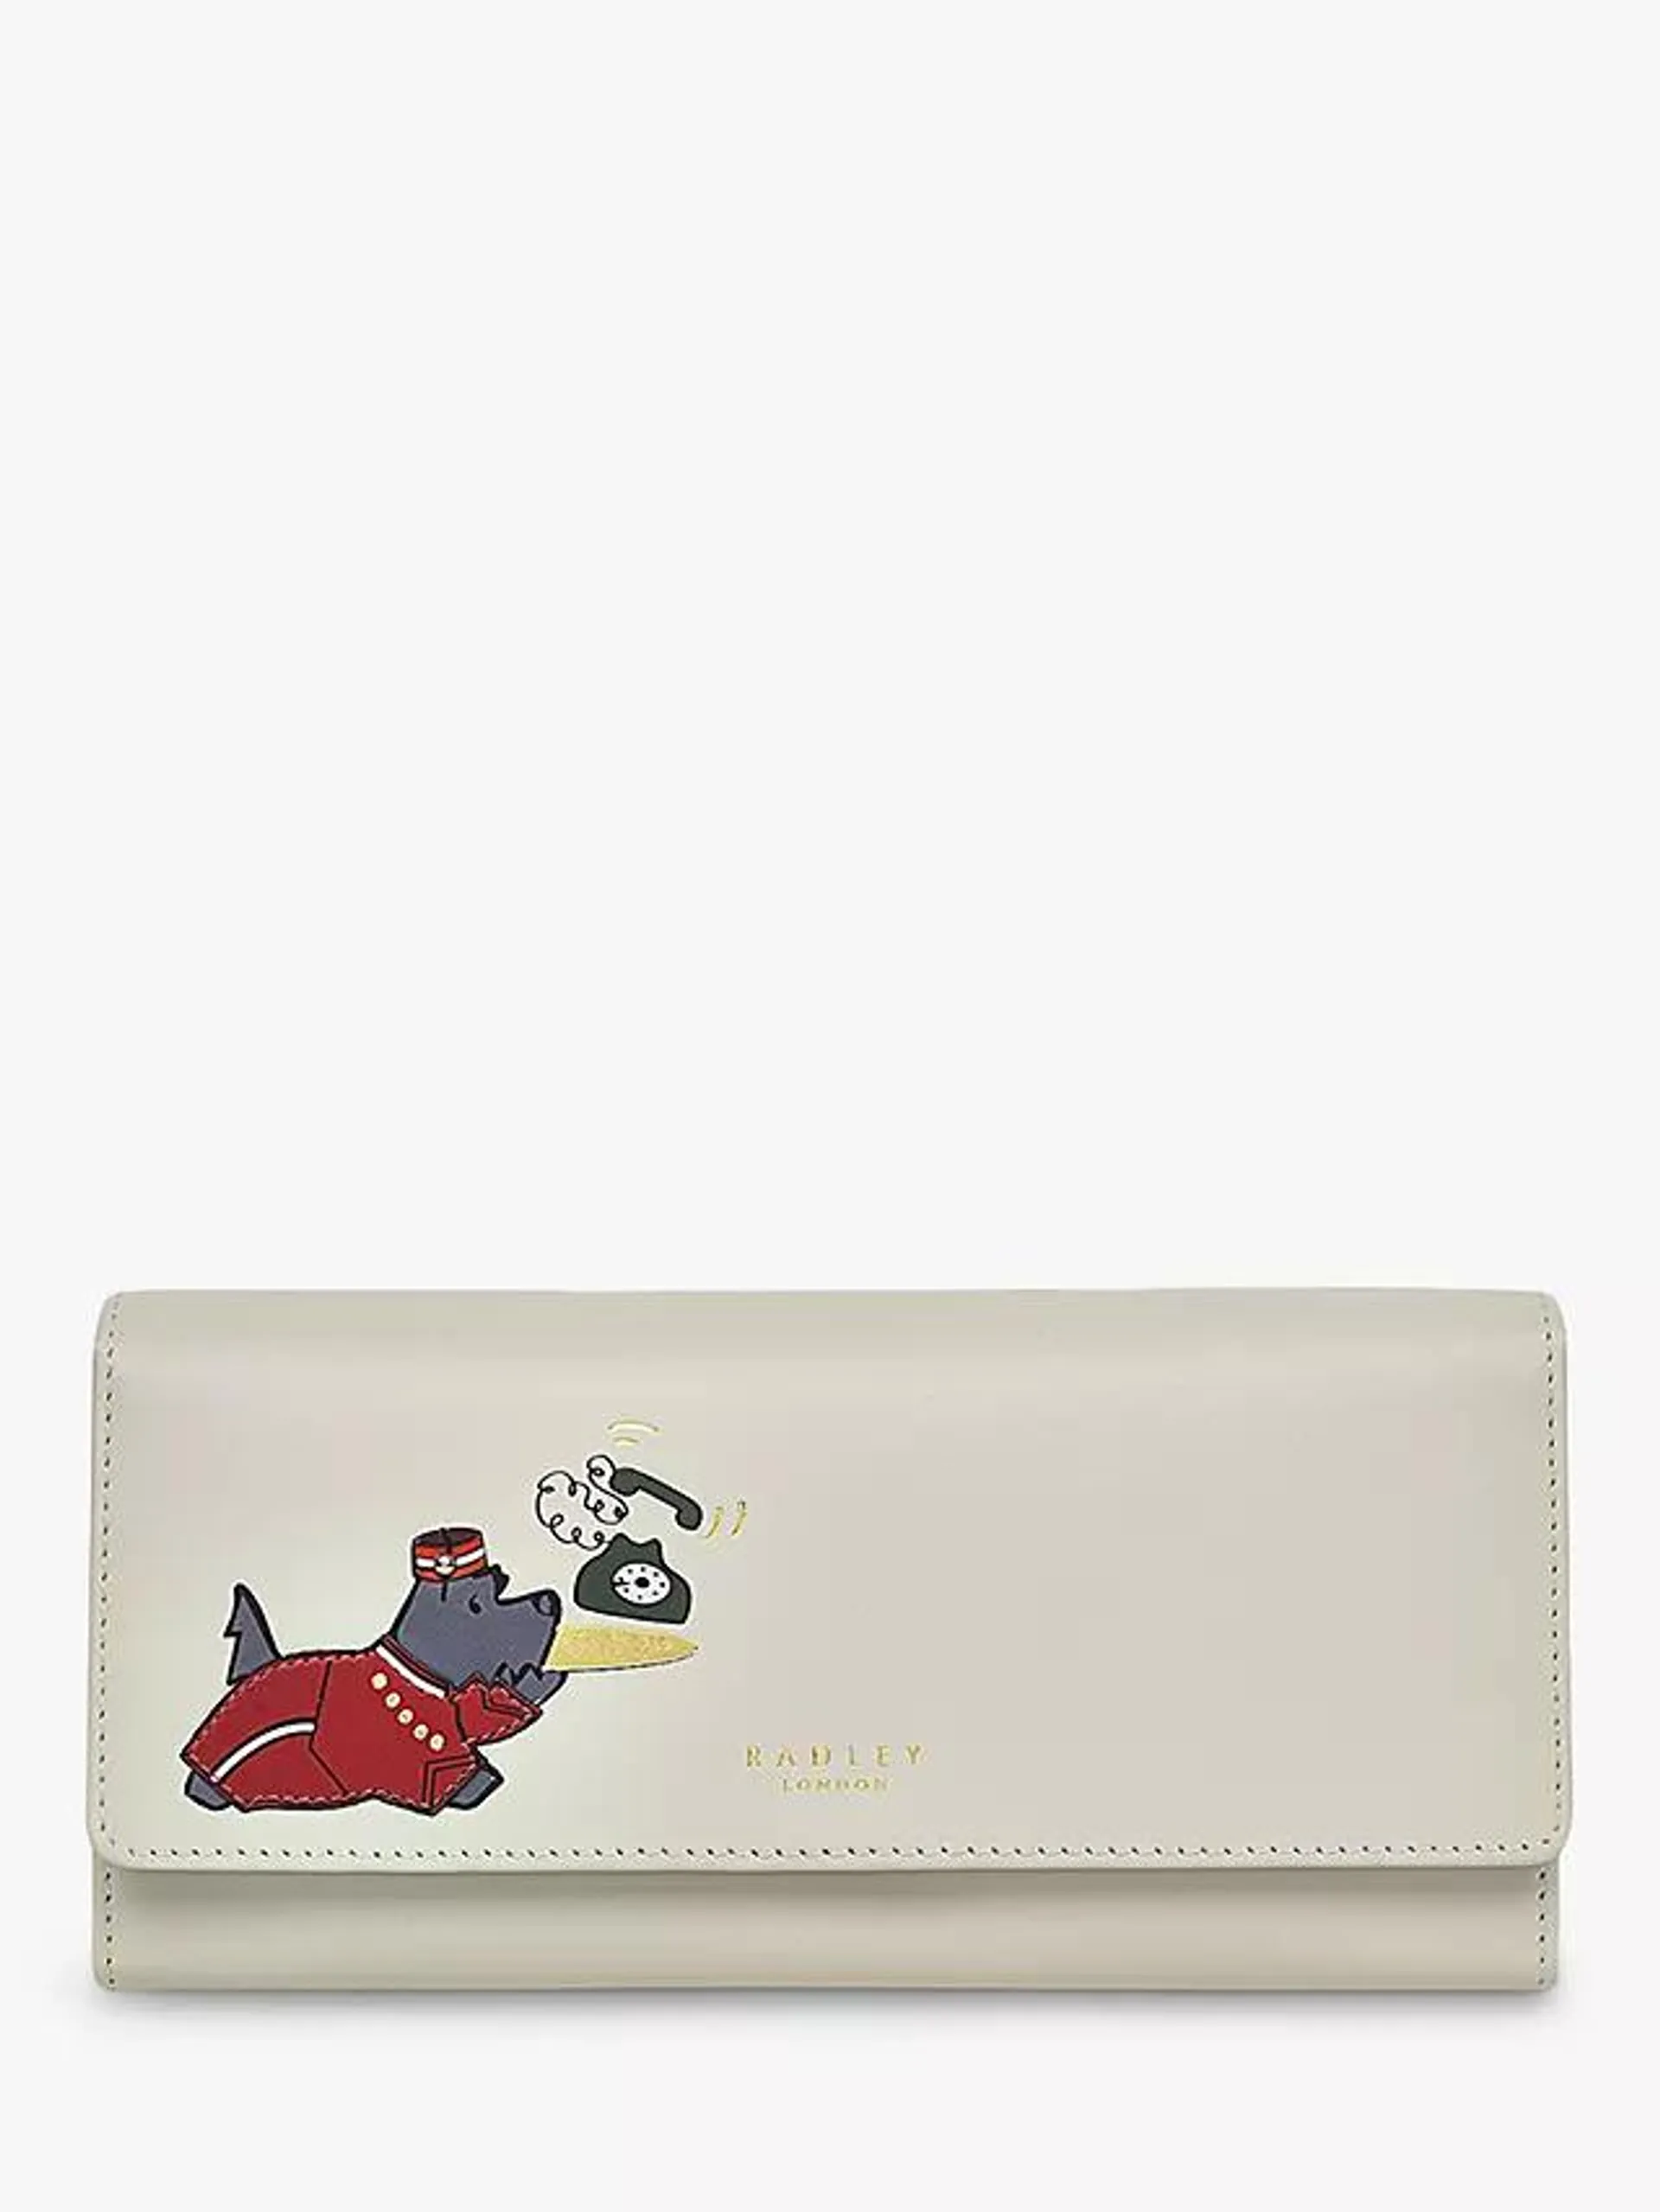 Radley Ring Ring Large Flapover Matinee Leather Purse, Pumice/Multi